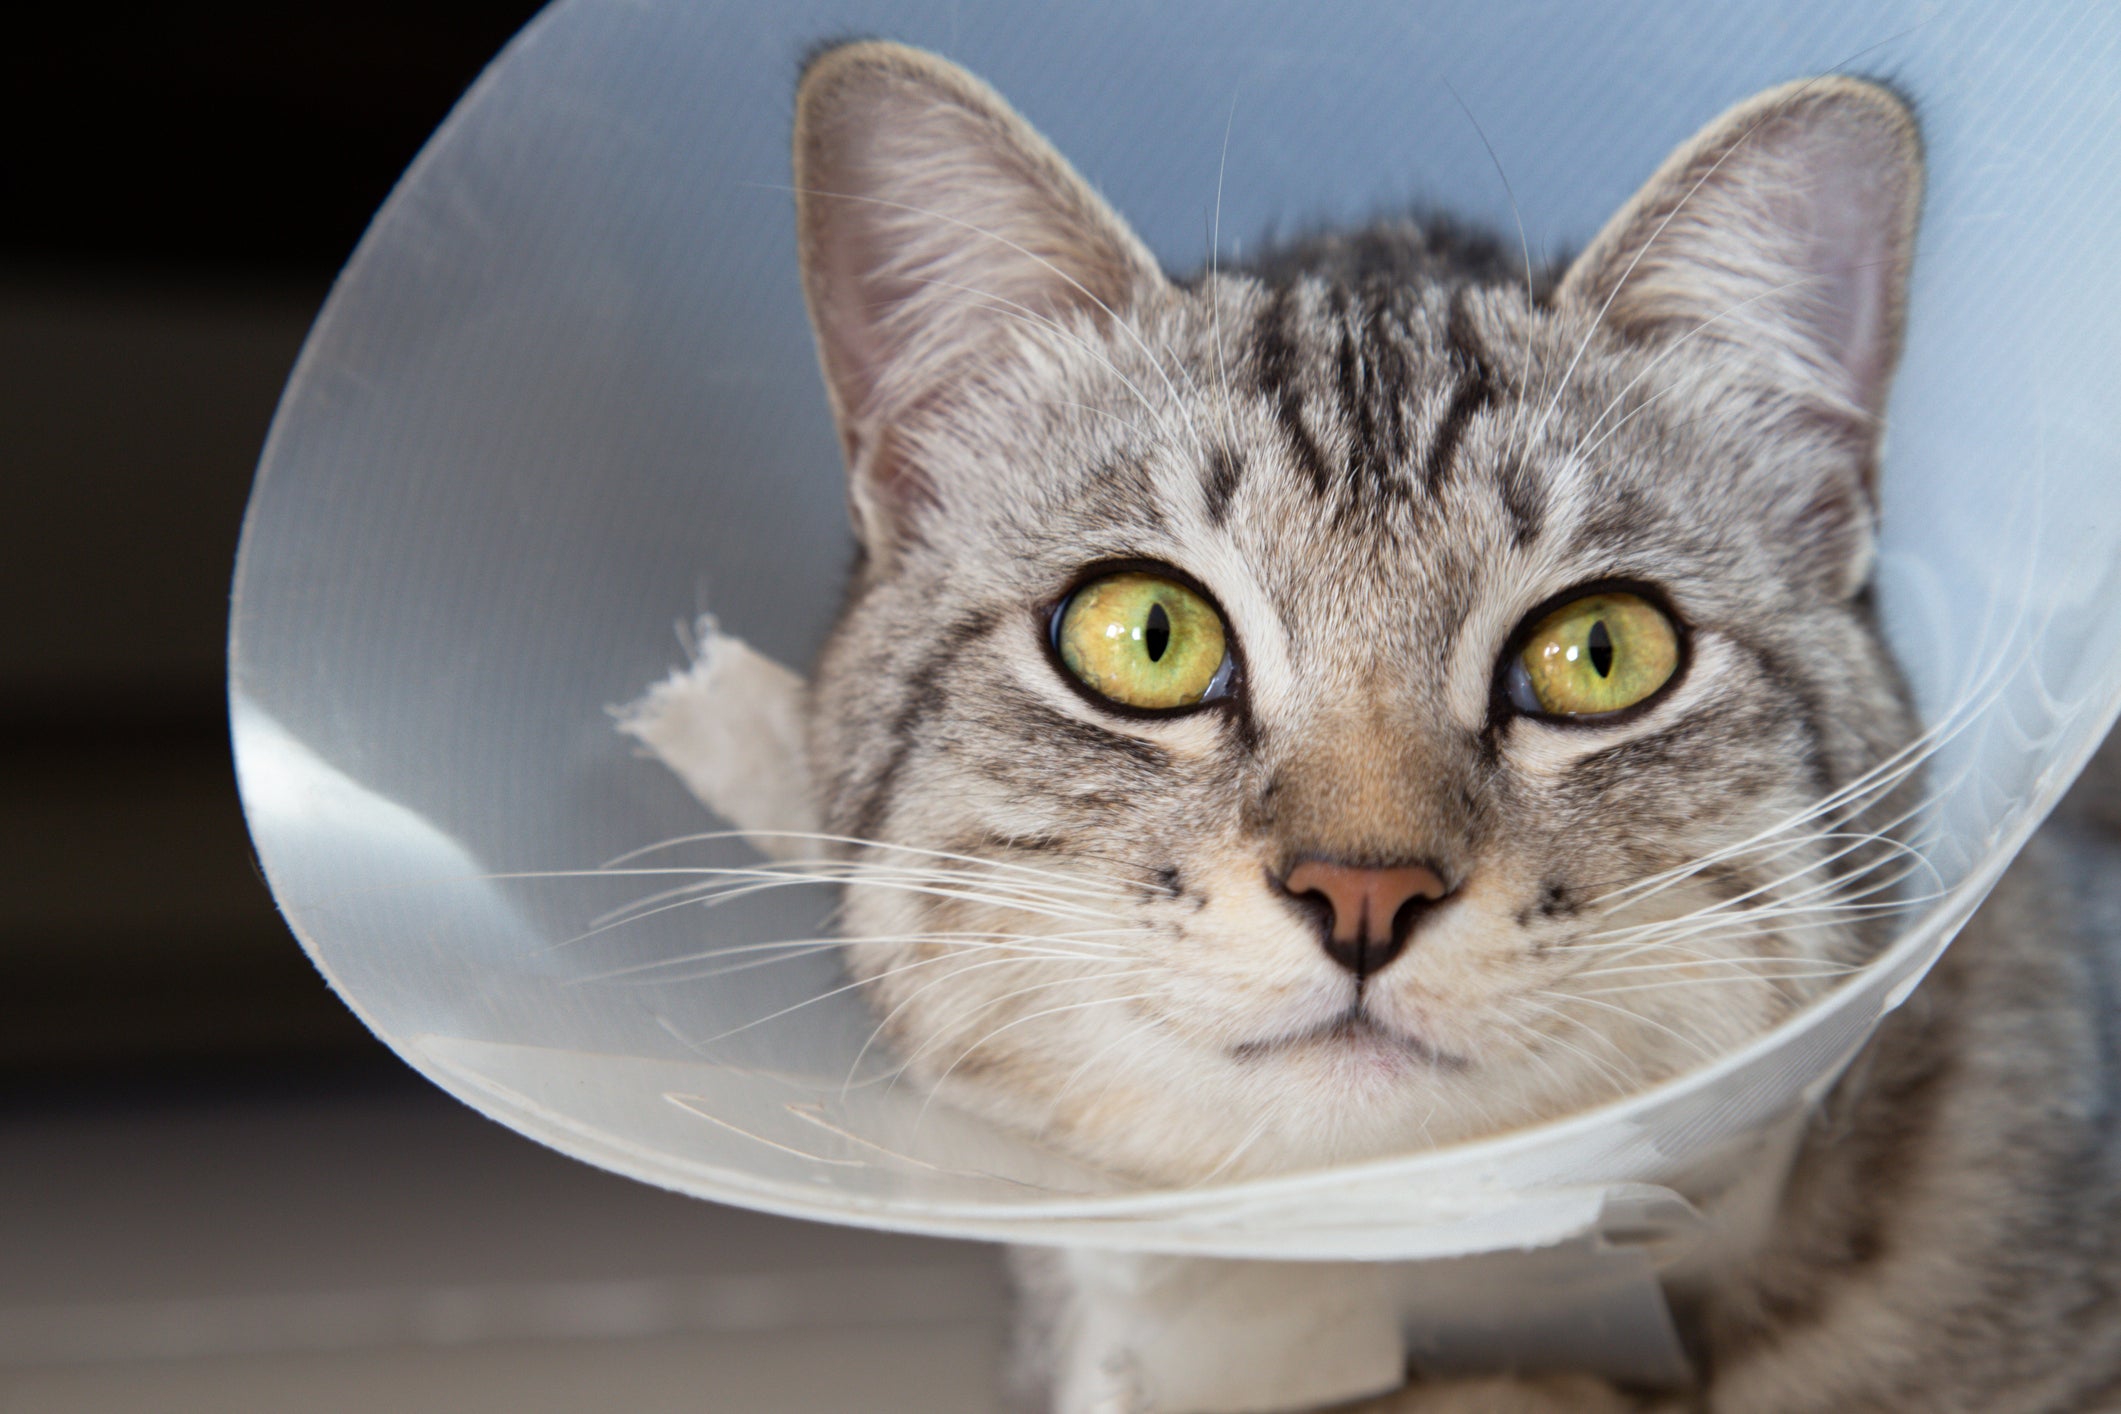 The situation is expected to affect over half of vet medicines